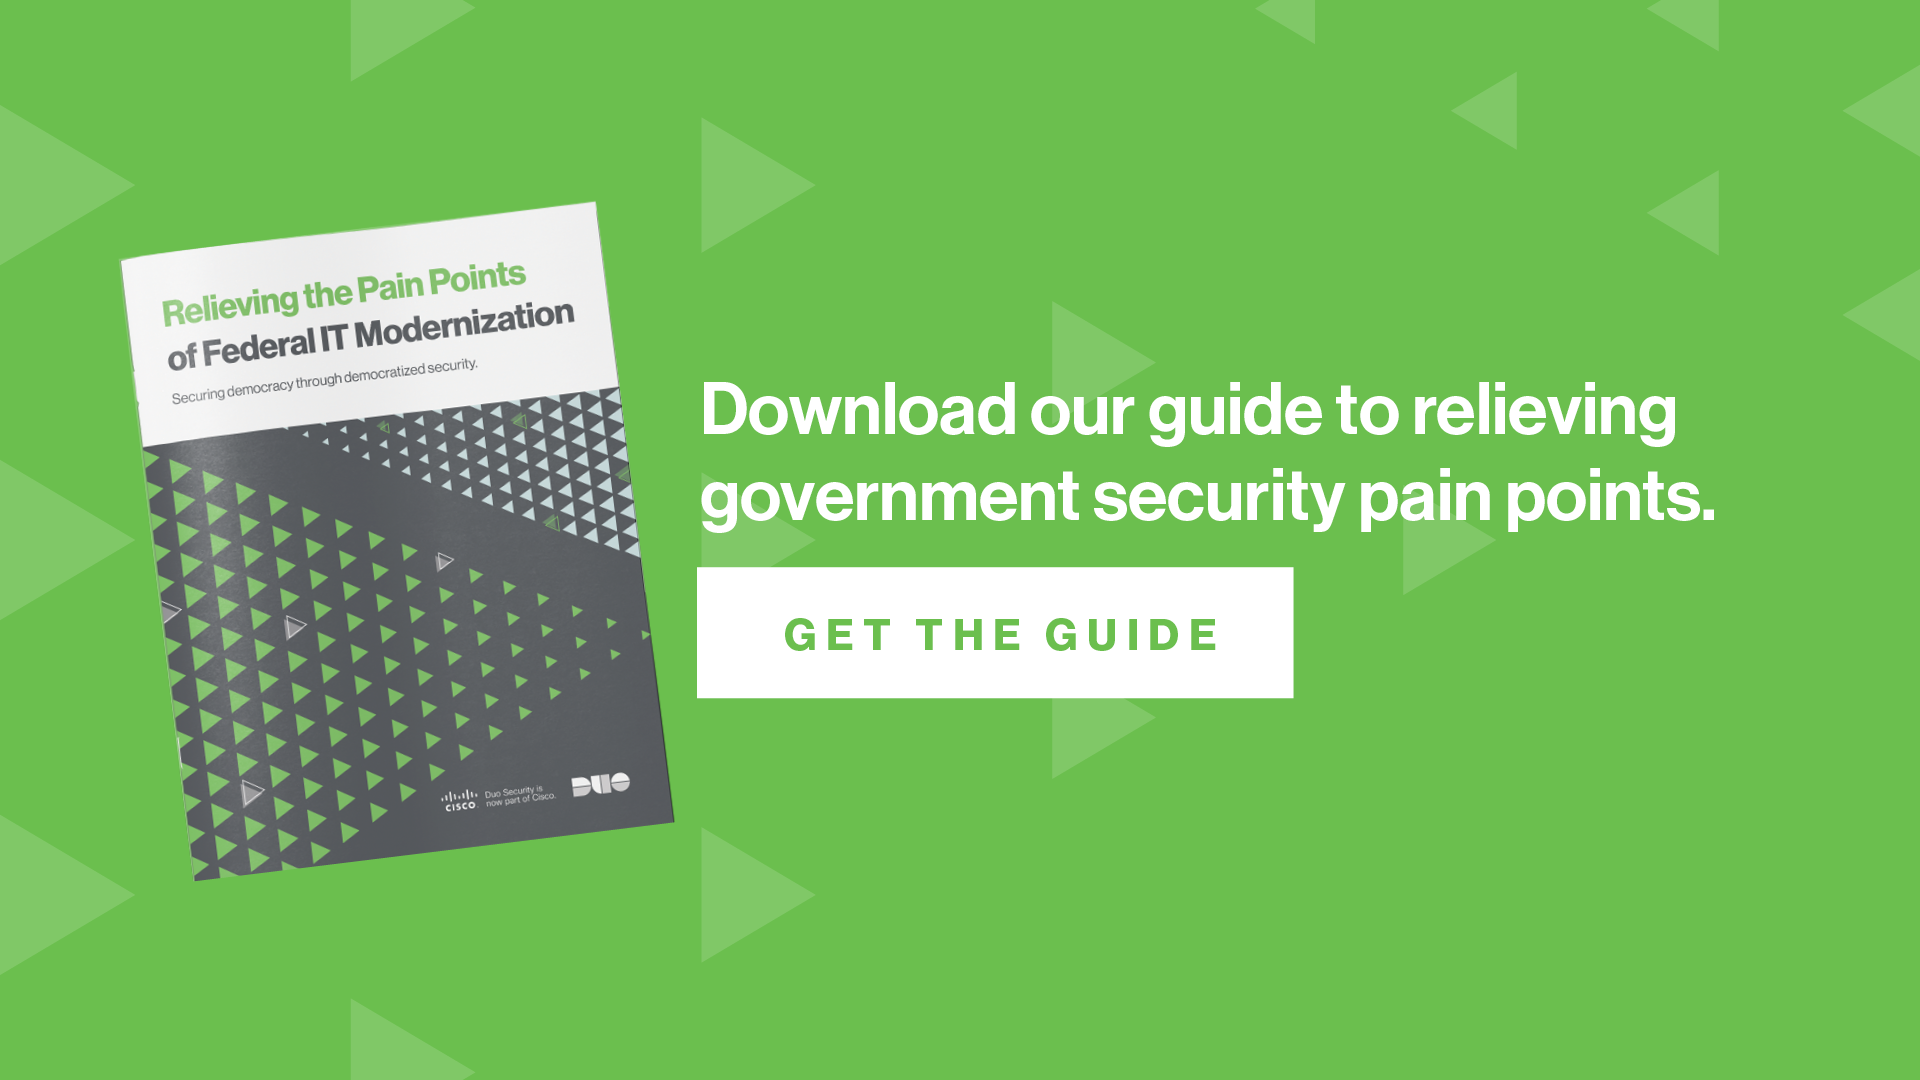 Relieve government security pain points. Get the guide: Relieving the Pain Points of Federal IT Modernization.